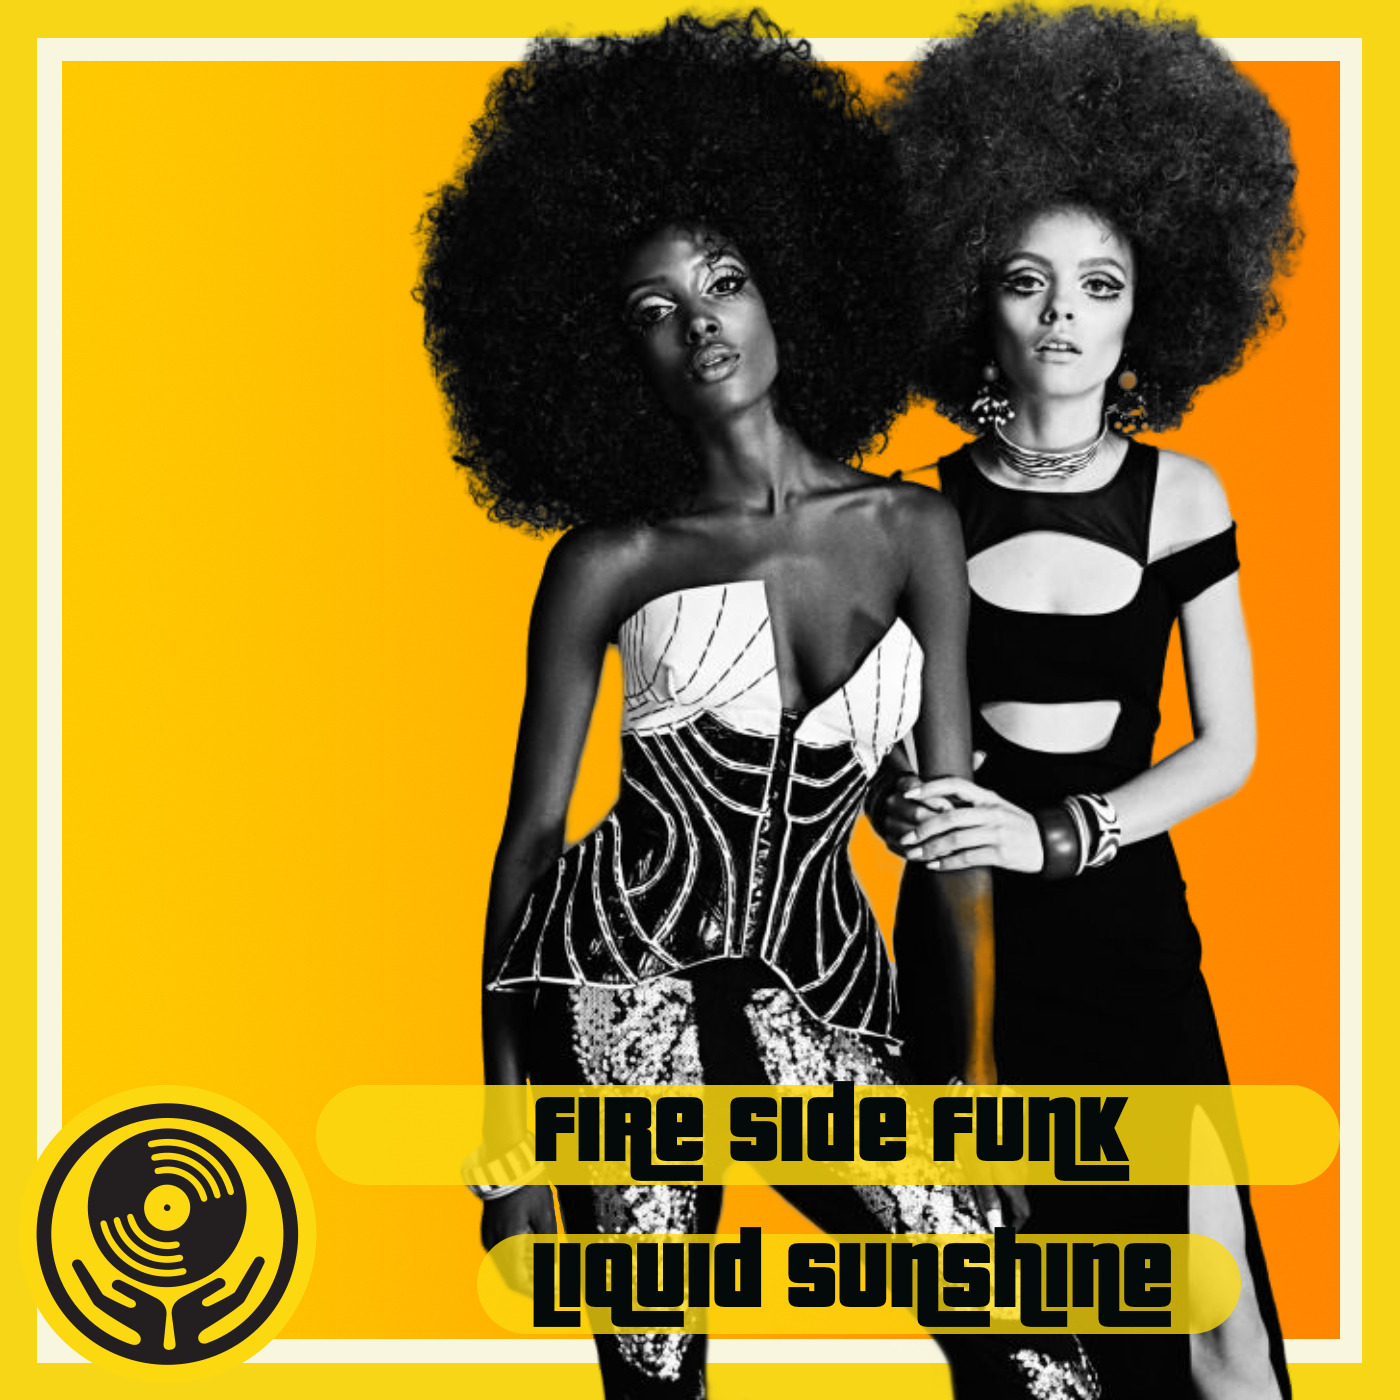 Fearsome Funk by the Fire Side - Liquid Sunshine @ The Face Radio, The Soul of Brooklyn - Show #121 - 22-08-22